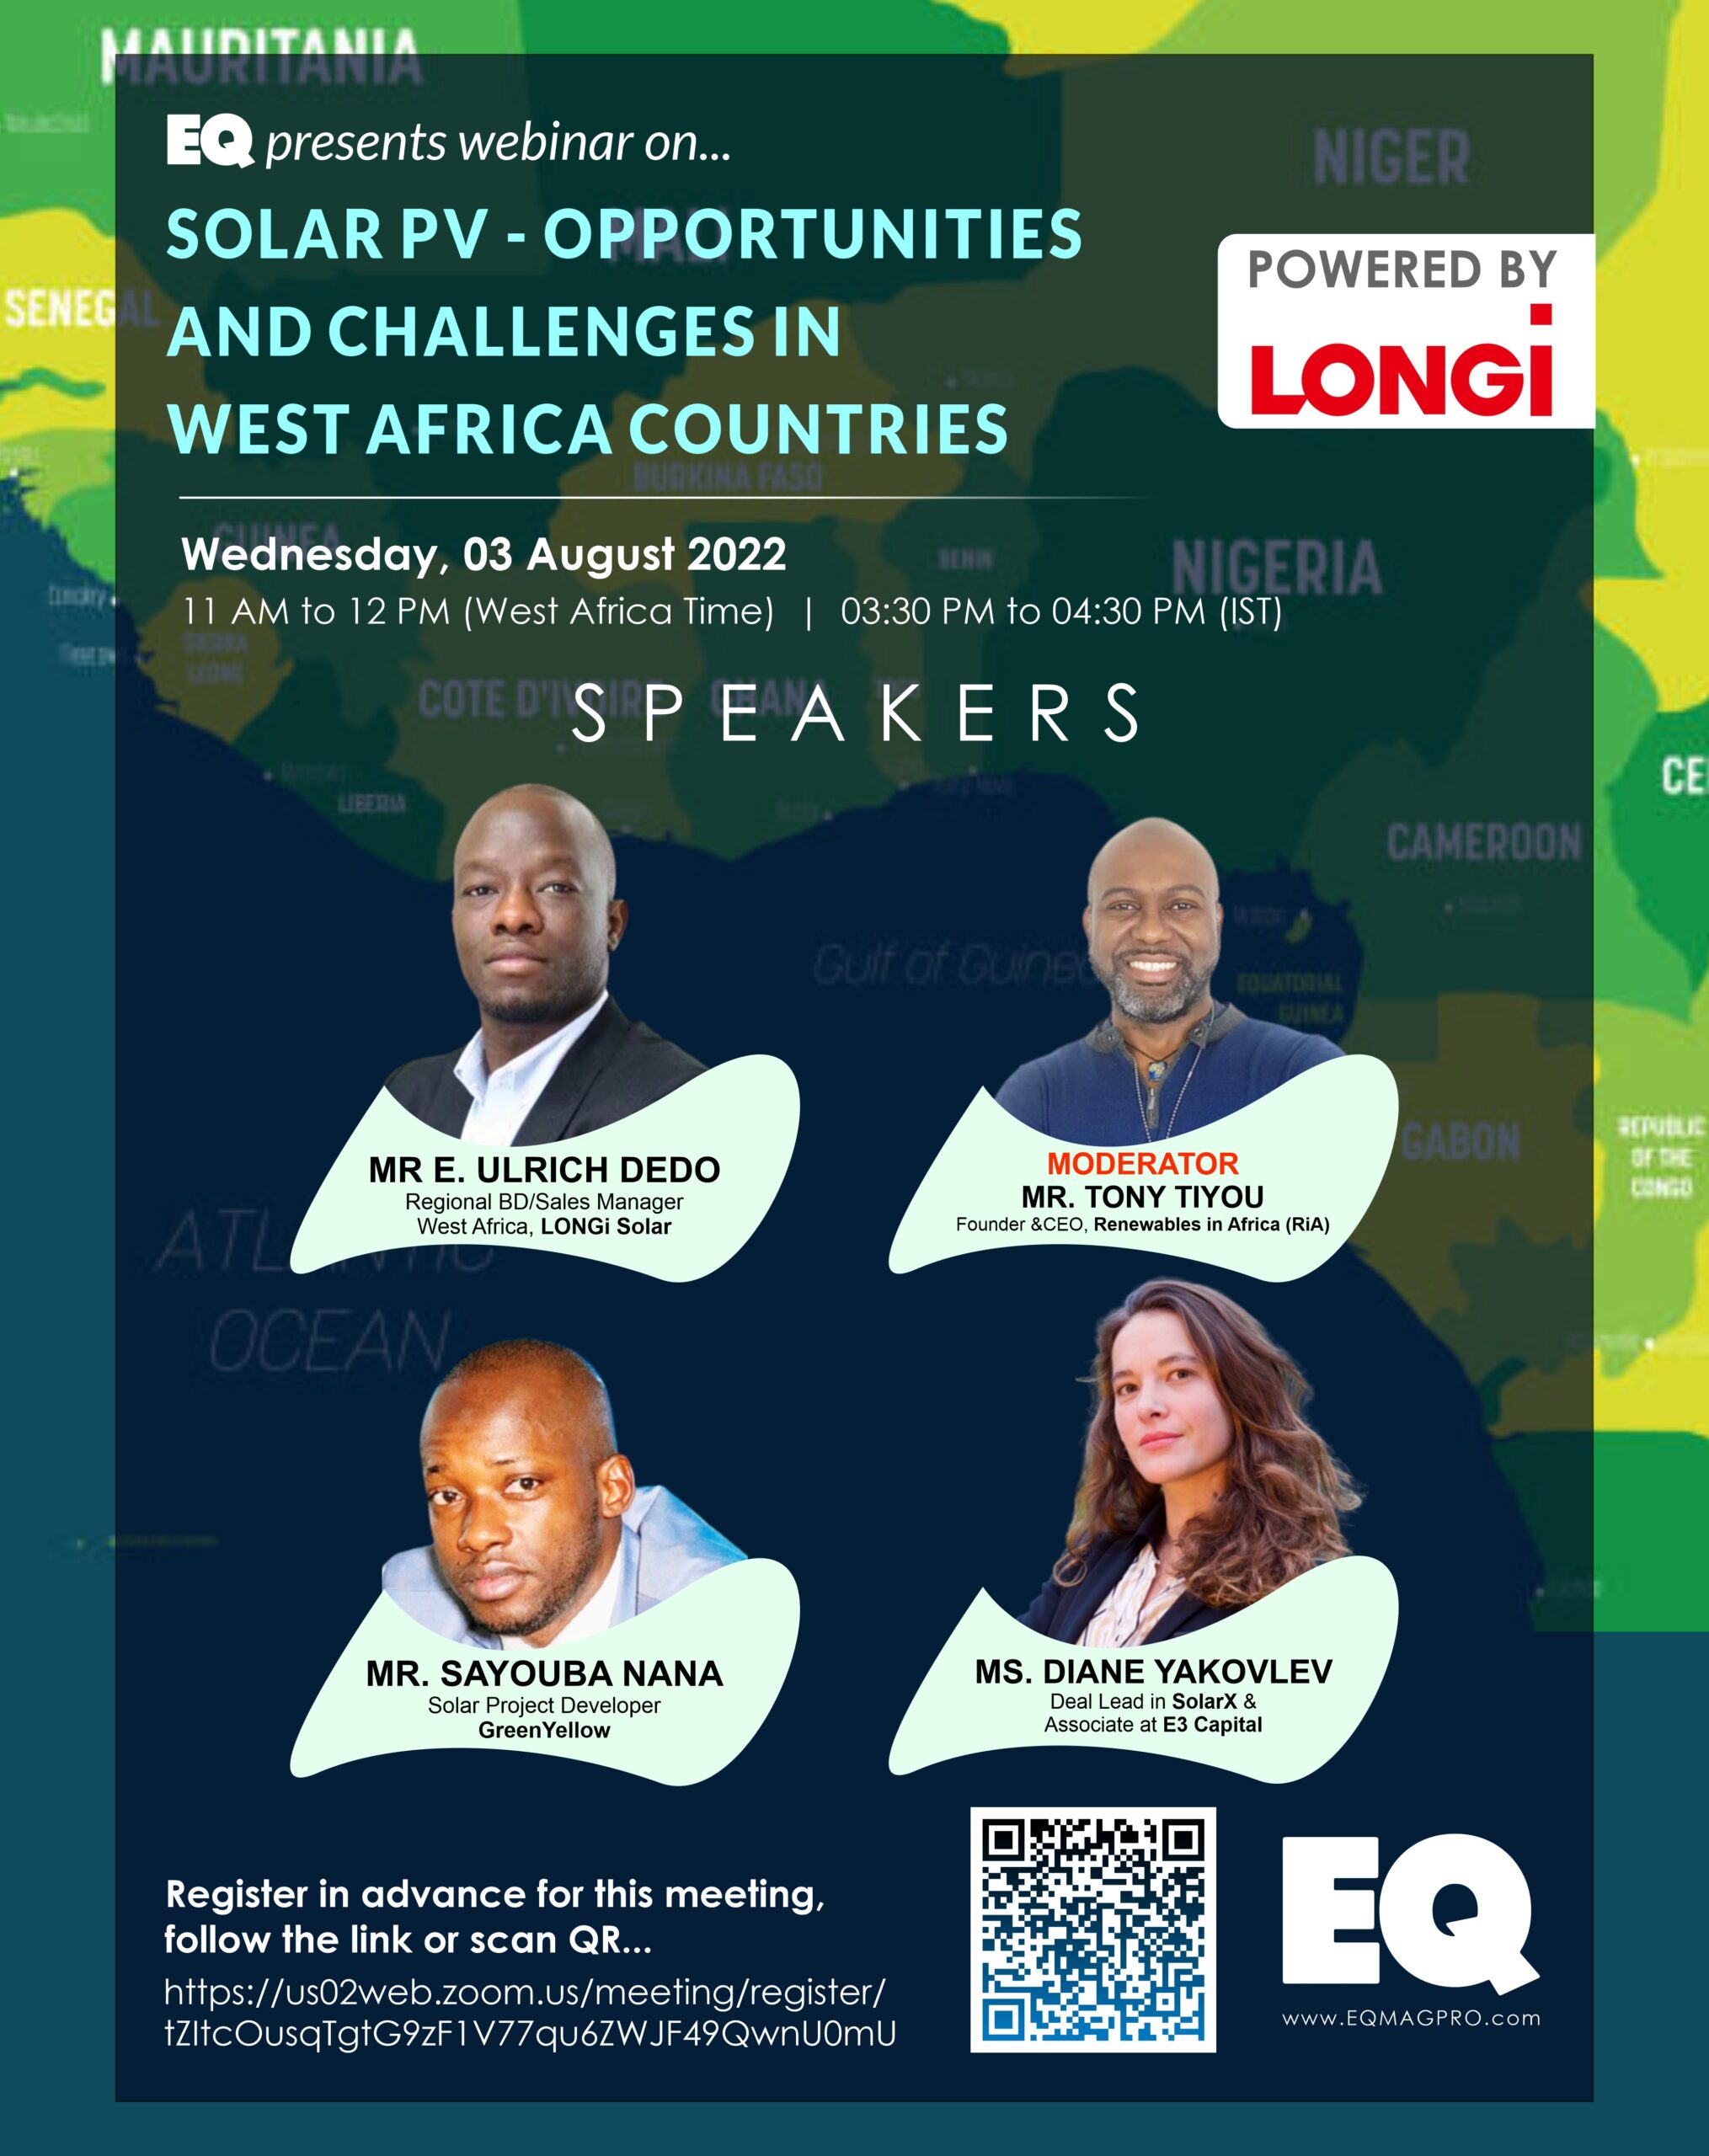 EQ Webinar on West Africa PV Market Outlook & LONGi’s Business Strategy for the Region Powered by LONGi 3rd August 2022 (Wednesday) 3:30 PM Onwards….Register Now!